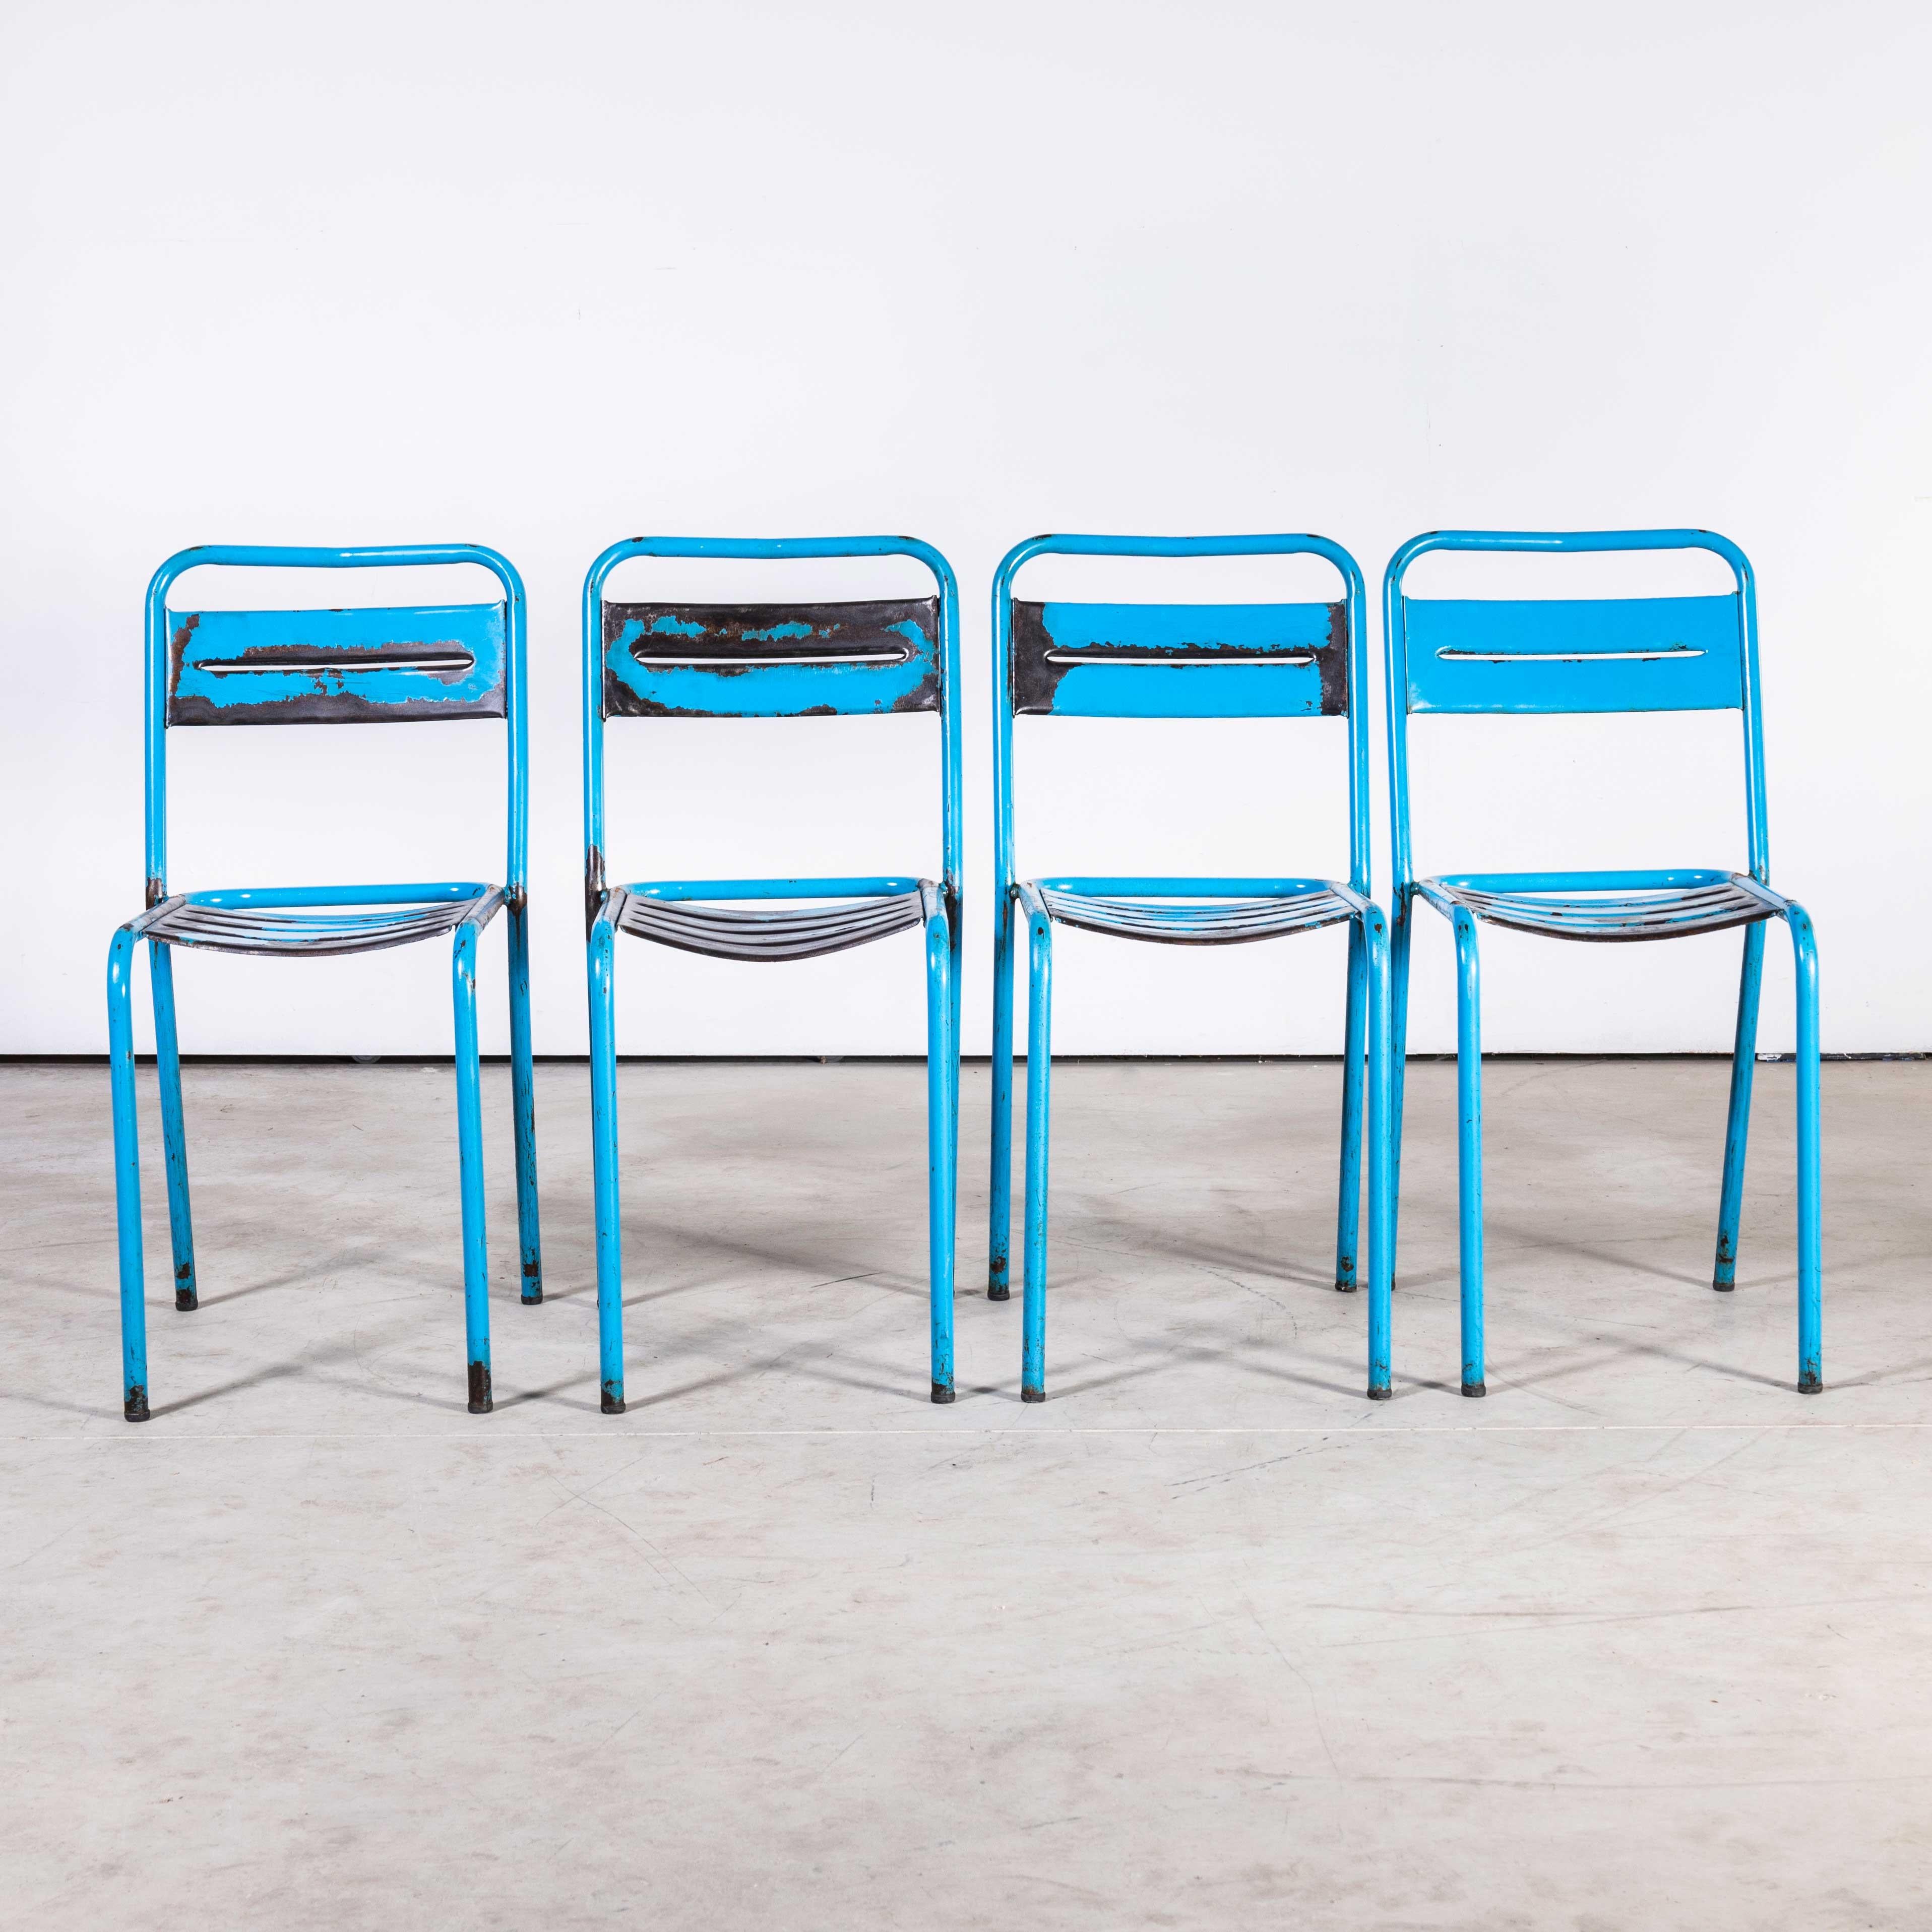 1950’s French blue metal stacking outdoor chairs – set of four
1950’s French blue metal stacking outdoor chairs – set of eight. Reminiscent of Tolix but not made by Tolix, this style of chair was industrially produced in the 1950’s by various